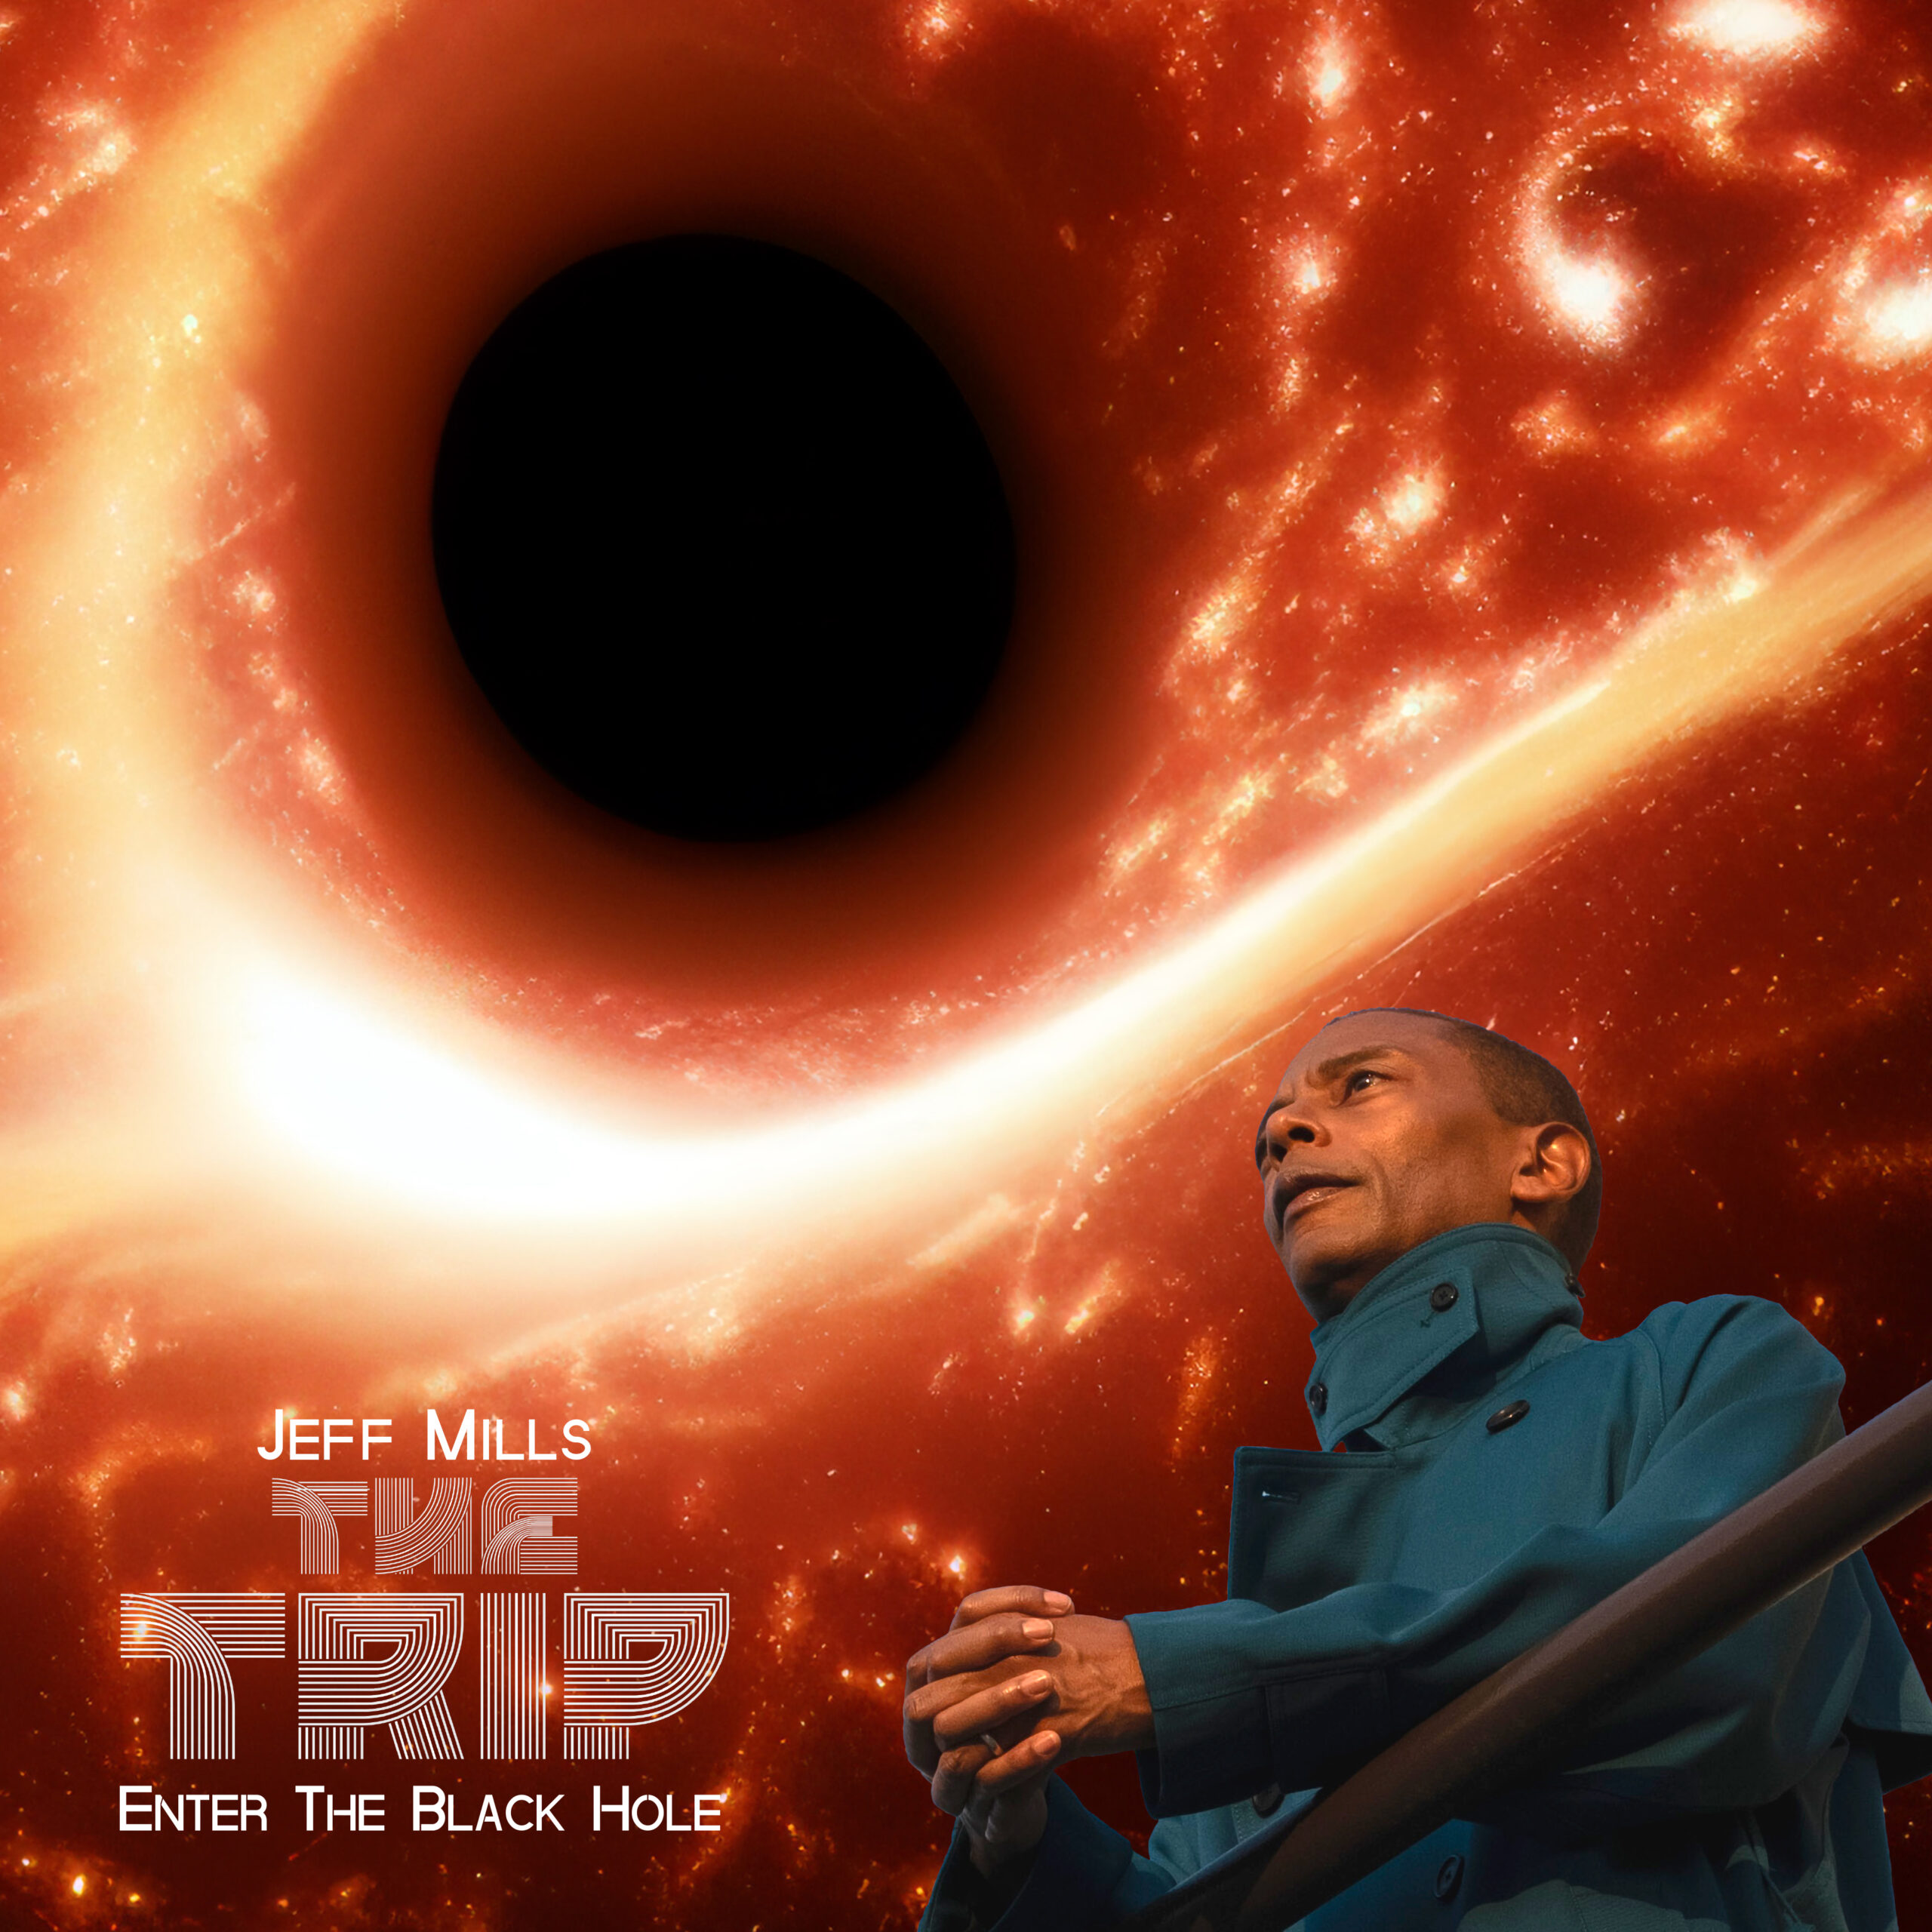 This image is a visual cue for the review of Jeff Mills - The Trip - Enter The Black Hole